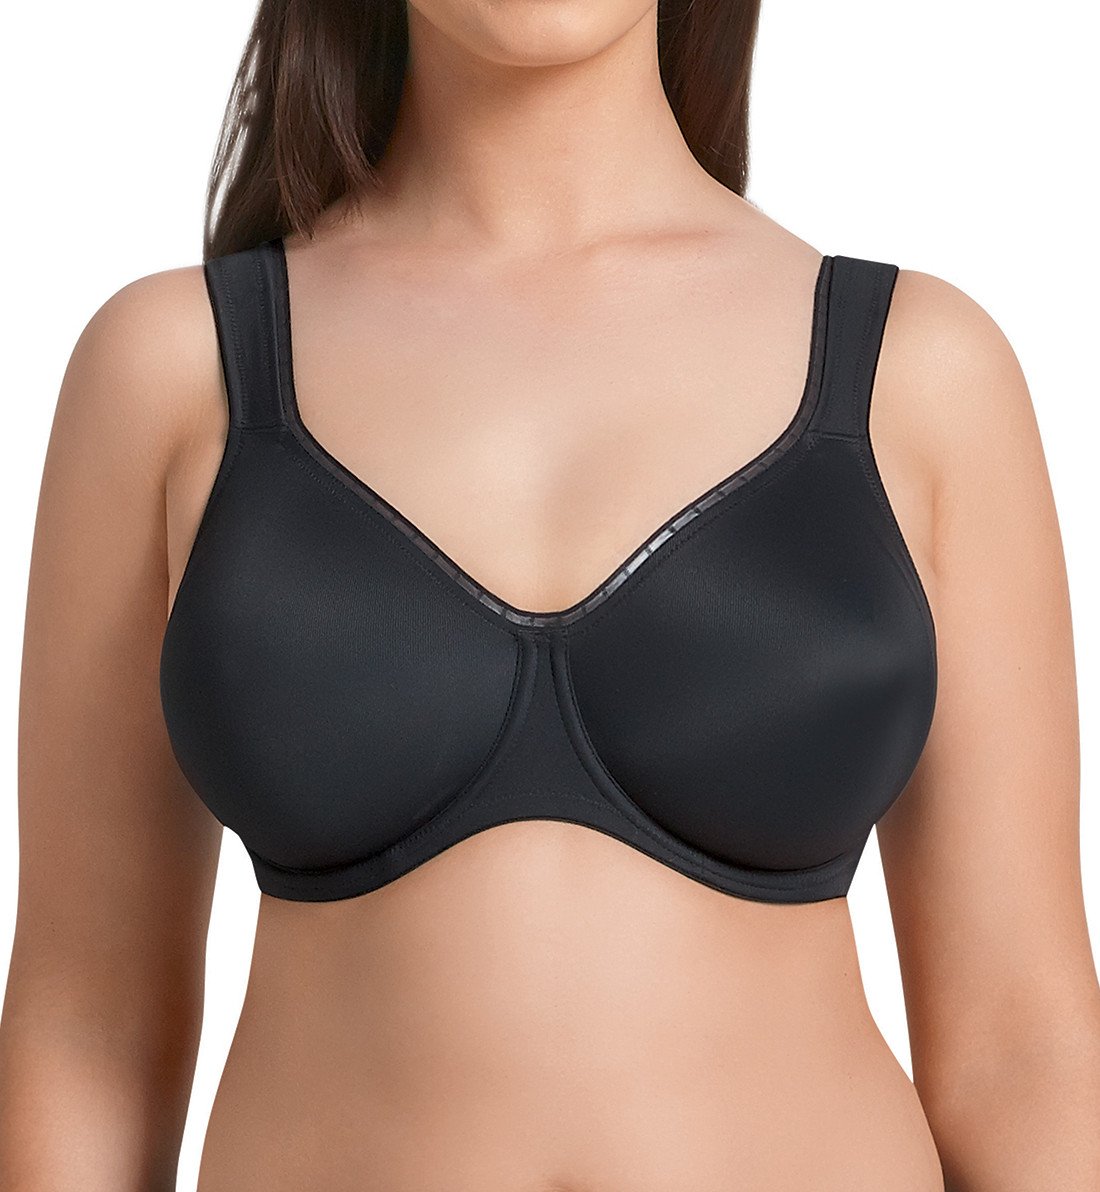 Rosa Faia by Anita Twin Firm Seamless Support Underwire Bra (5694)- Black